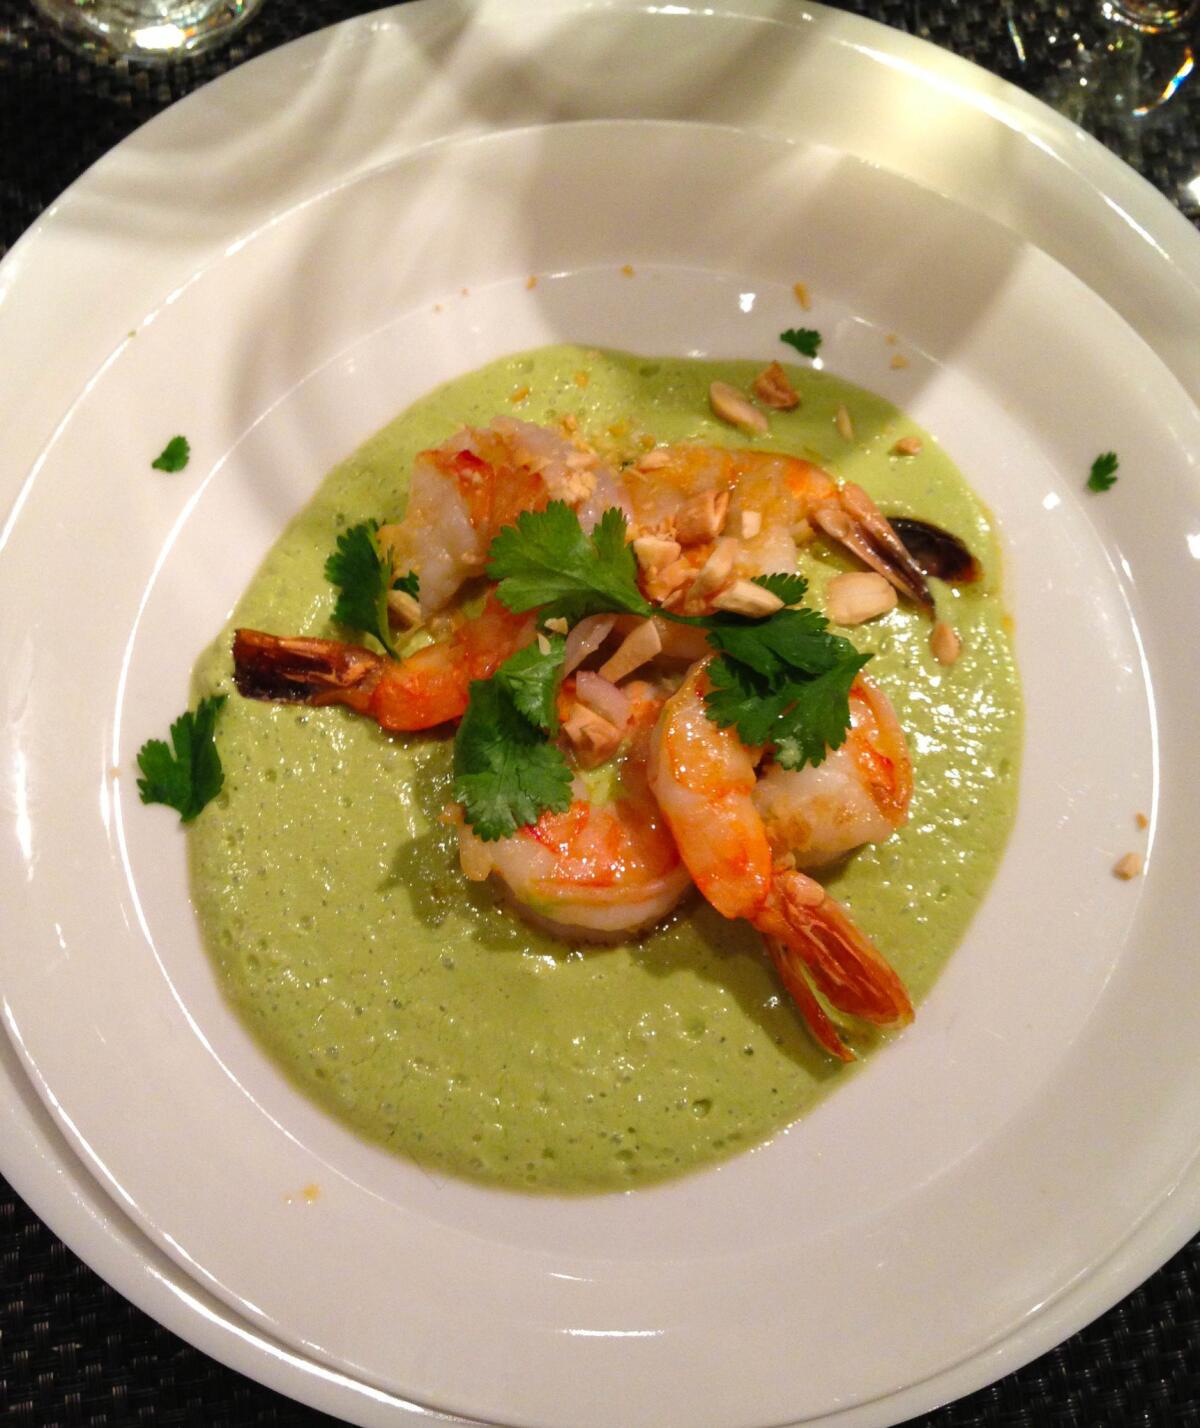 Shrimp in Simple Green Almond Sauce from Rick Bayless' "Mexico: One Plate at a Time," an ideal match with Guigal's sumptuous Condrieu